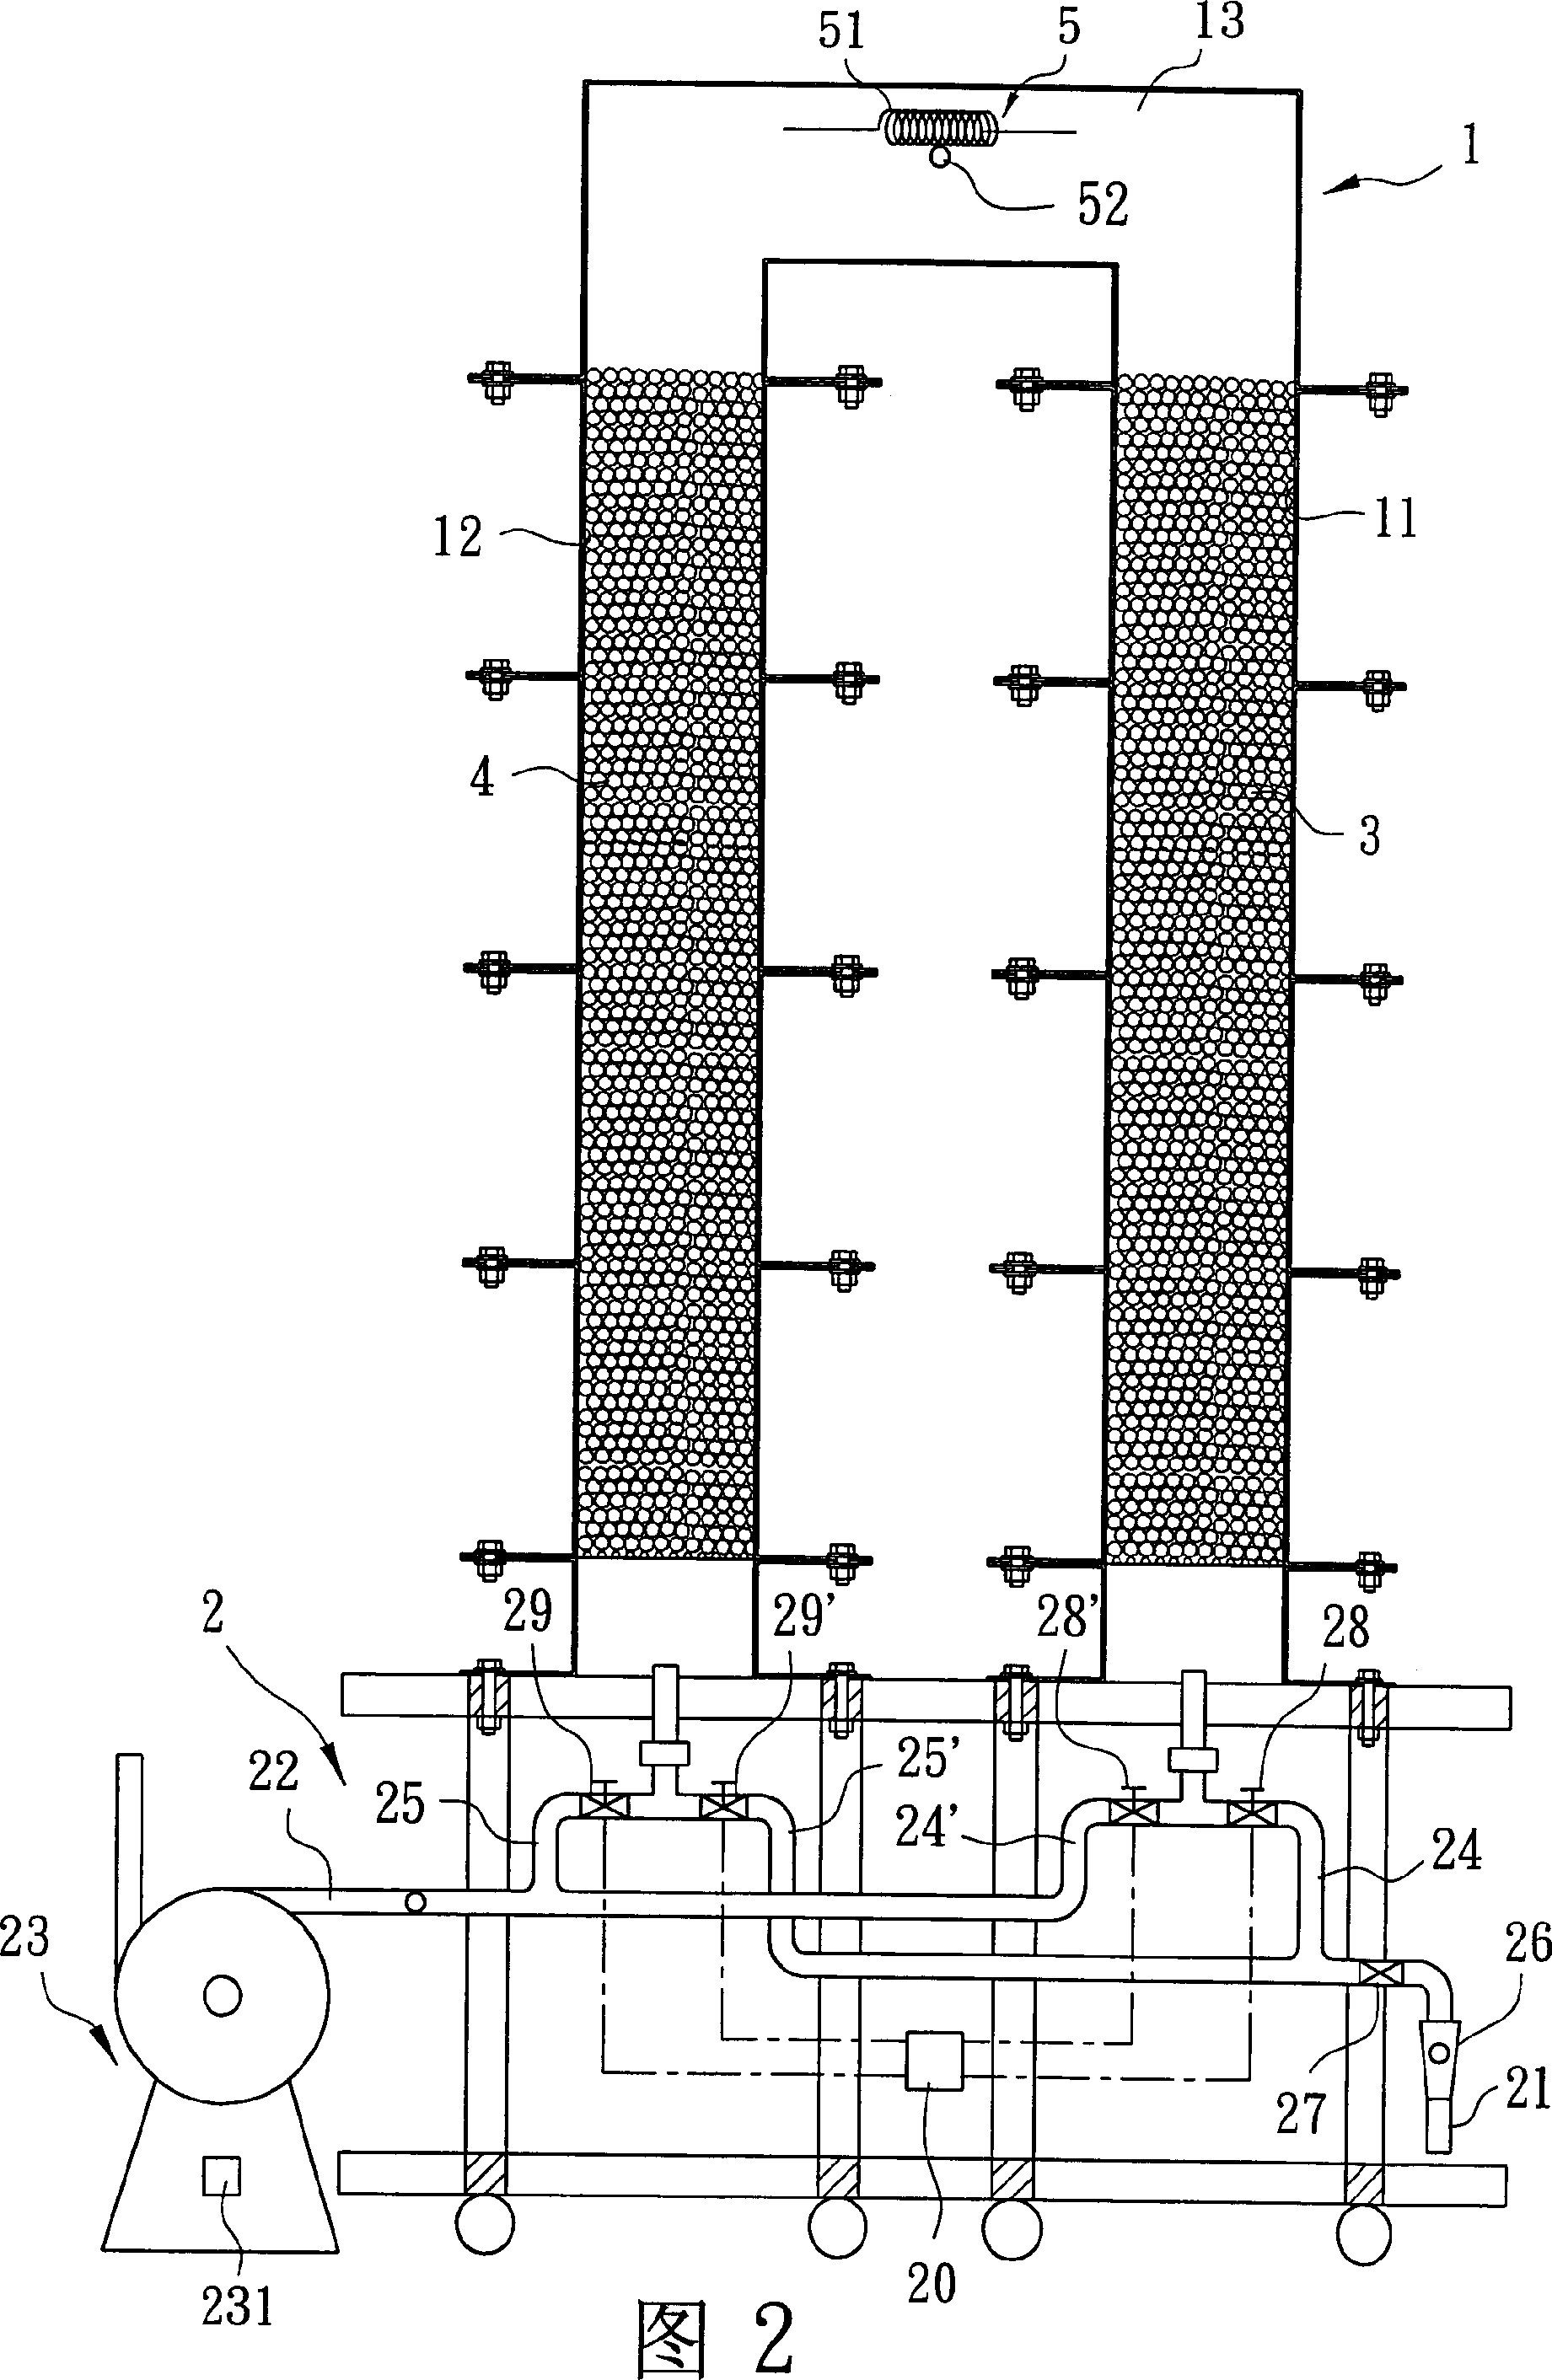 Heat storage type incinerating method for treating Dioxin-like compounds